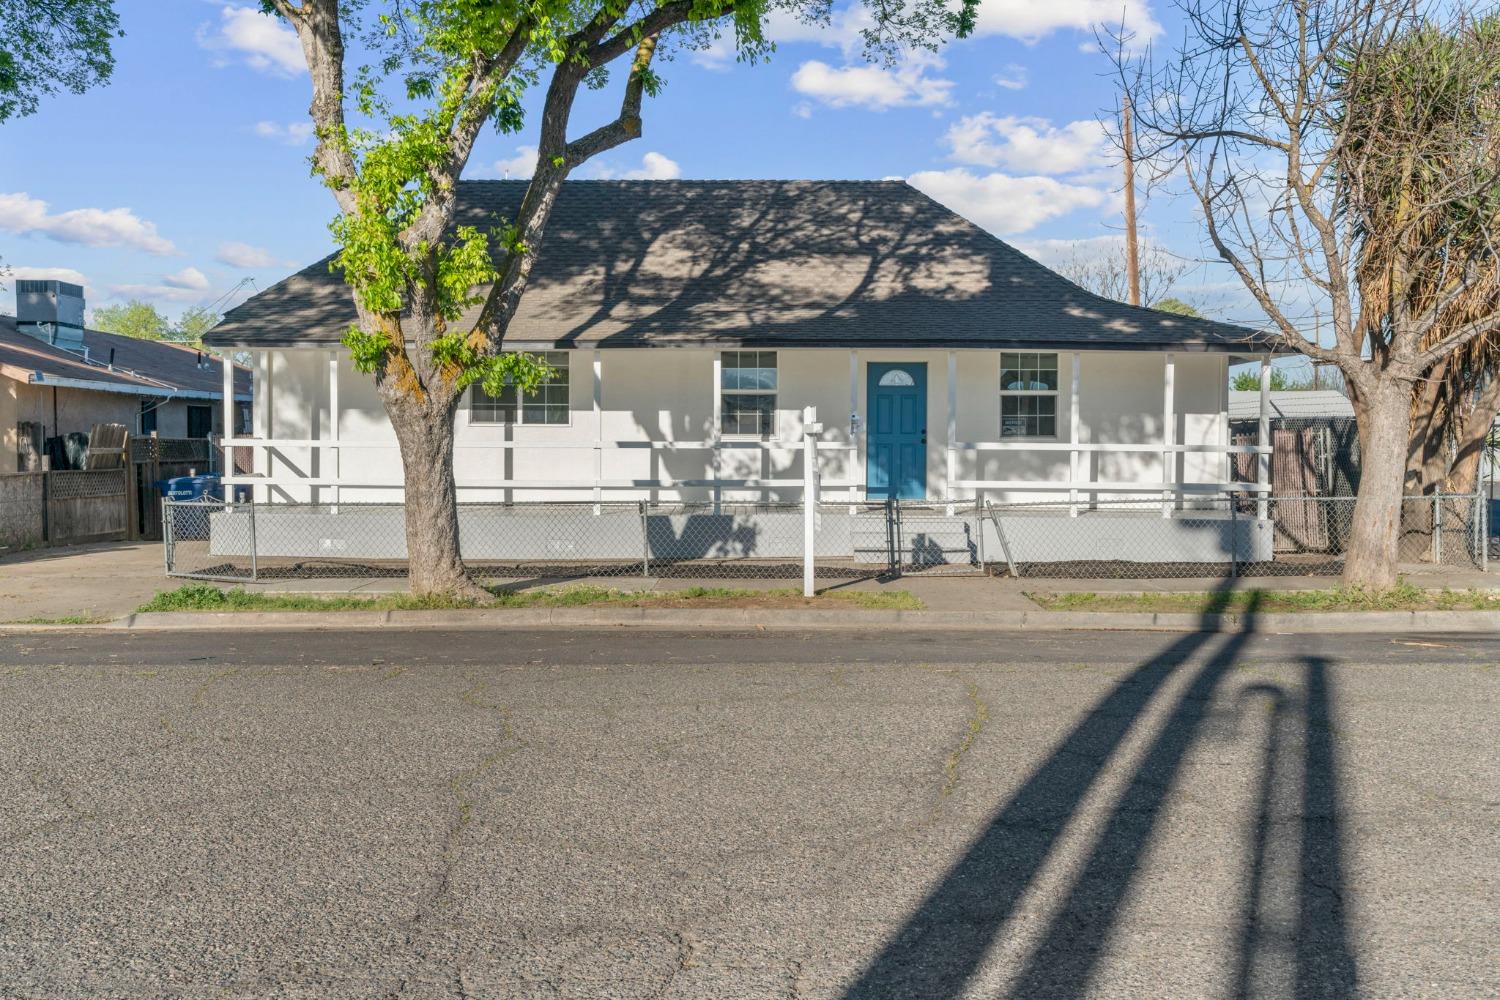 Photo of 418 S 4th St in Patterson, CA